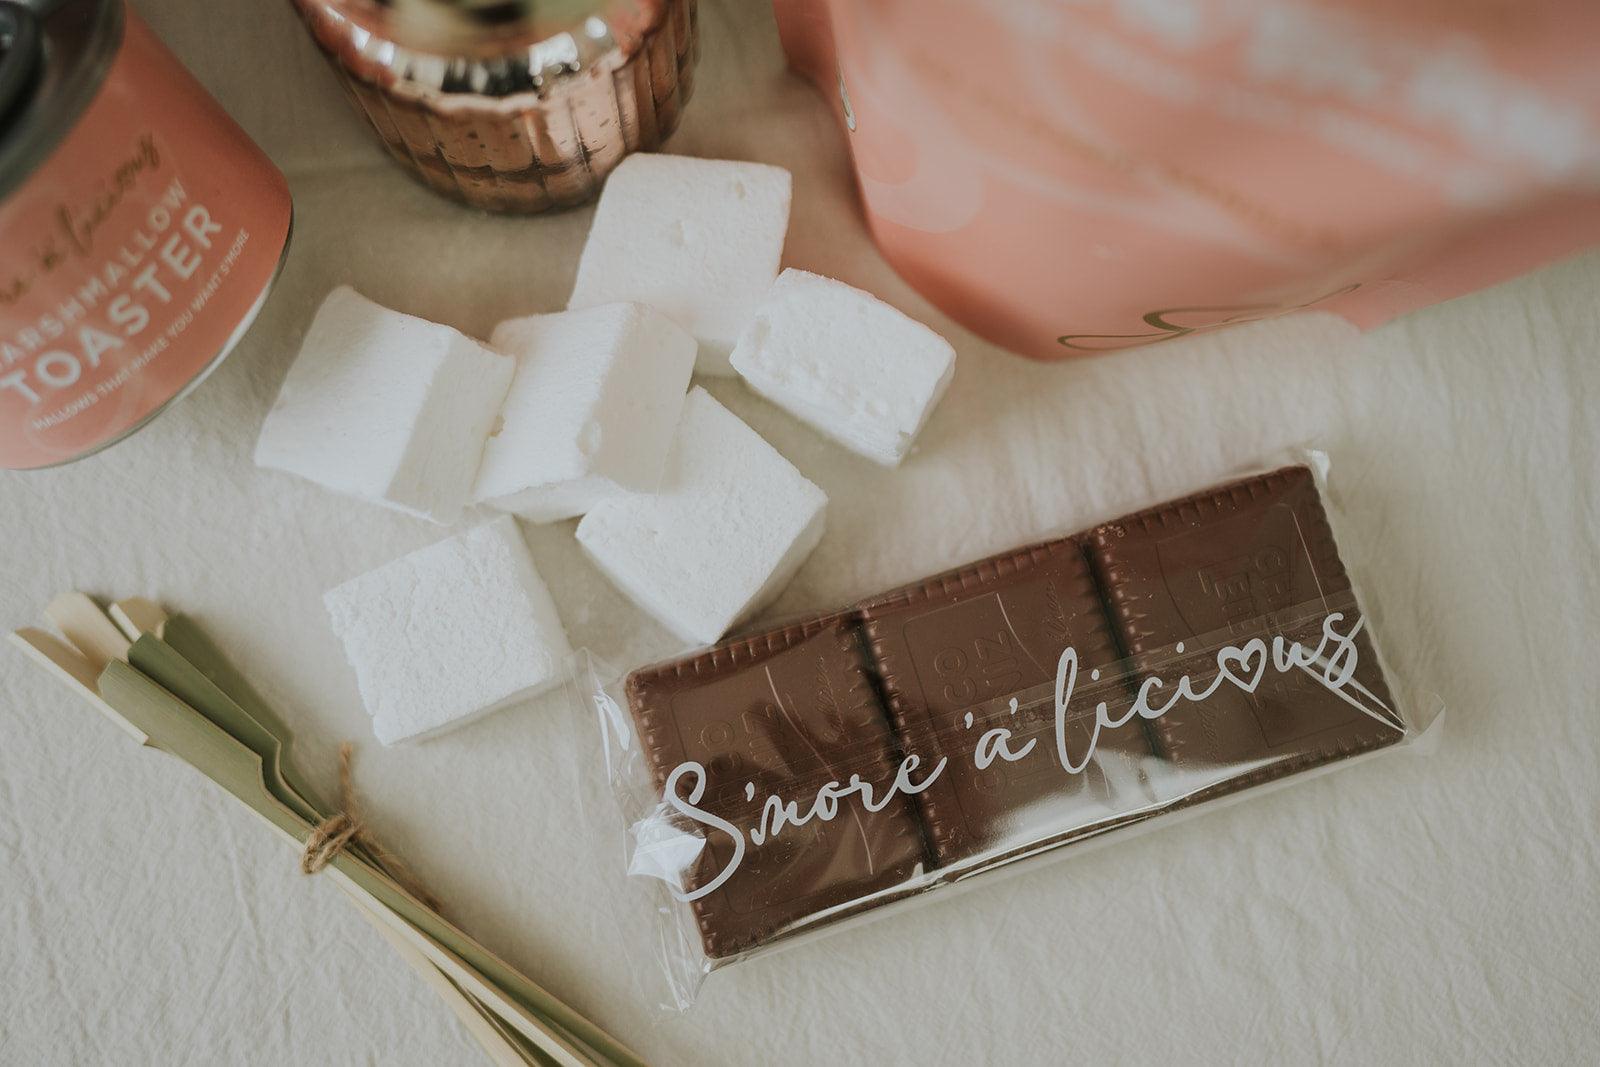 DIY Marshmallow S'mores Station - S’more’a’licious -<code> smorealicious.com </code>Handmade gifts and treats made in Northern Ireland